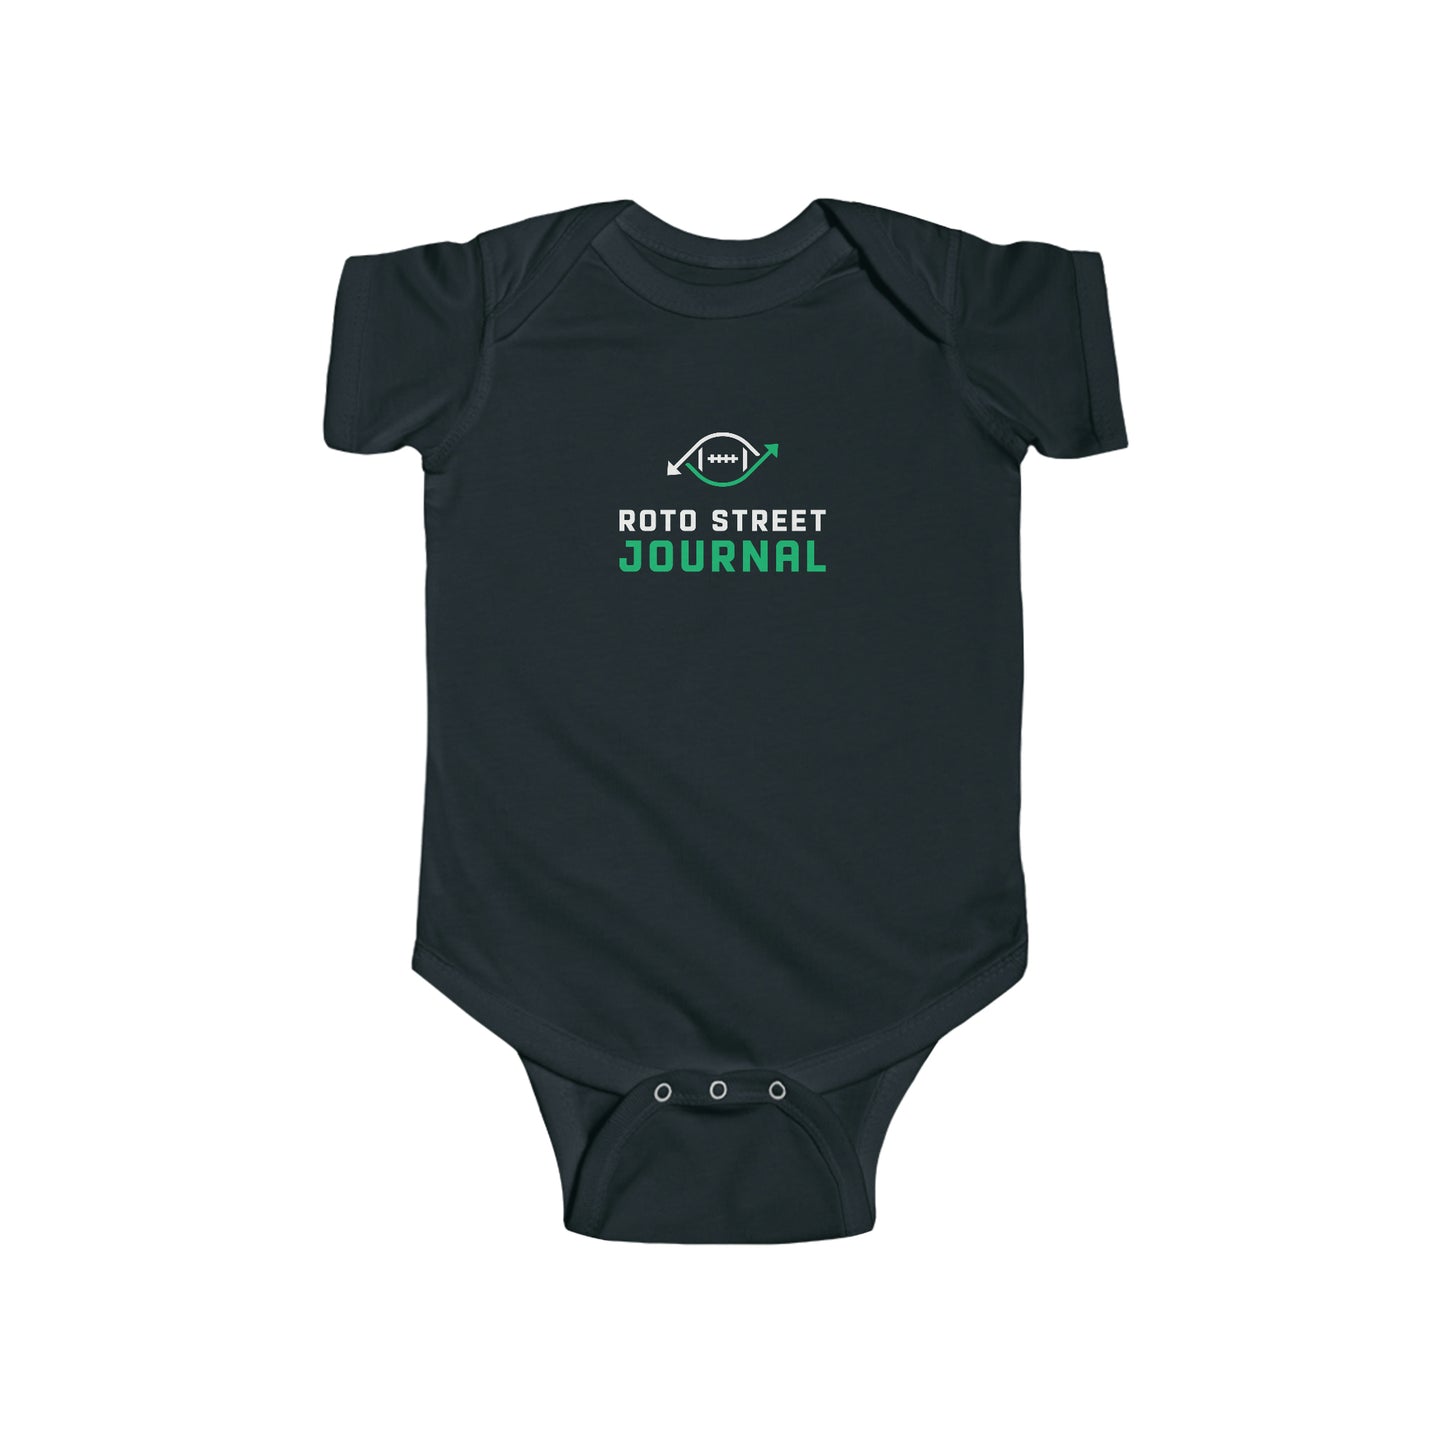 Roto Street Journal Onesie - Sleeper Collection - Fantasy Football Baby Clothes